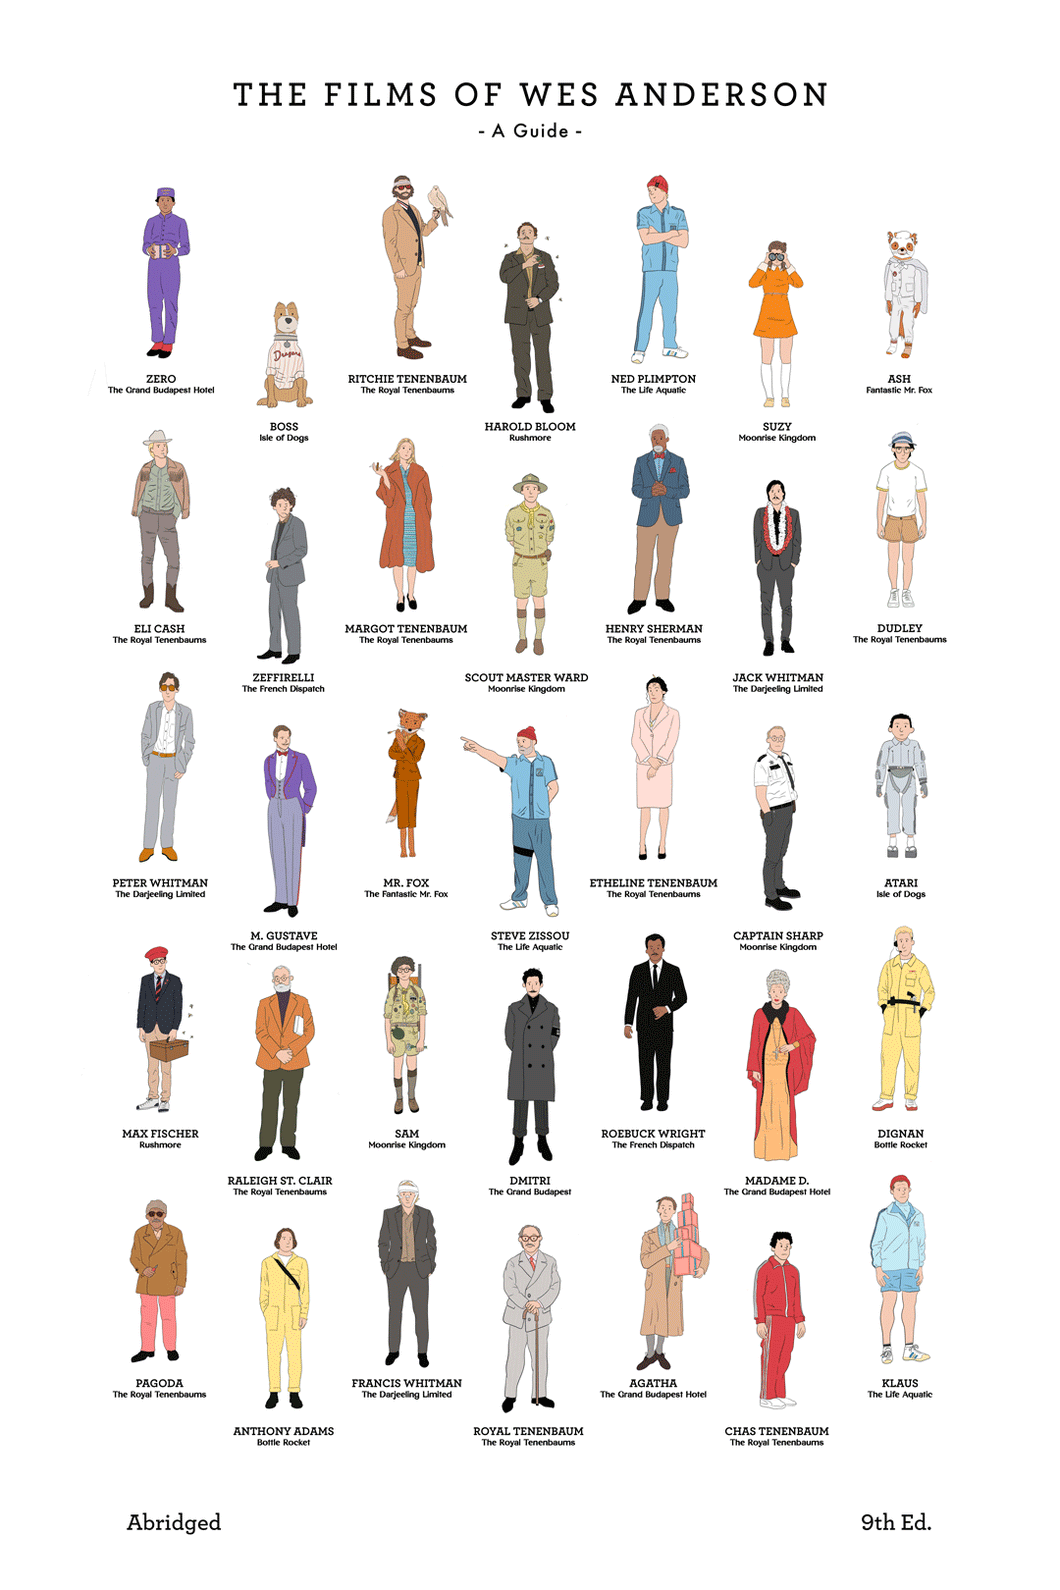 The Films of Wes Anderson (10th Edition)